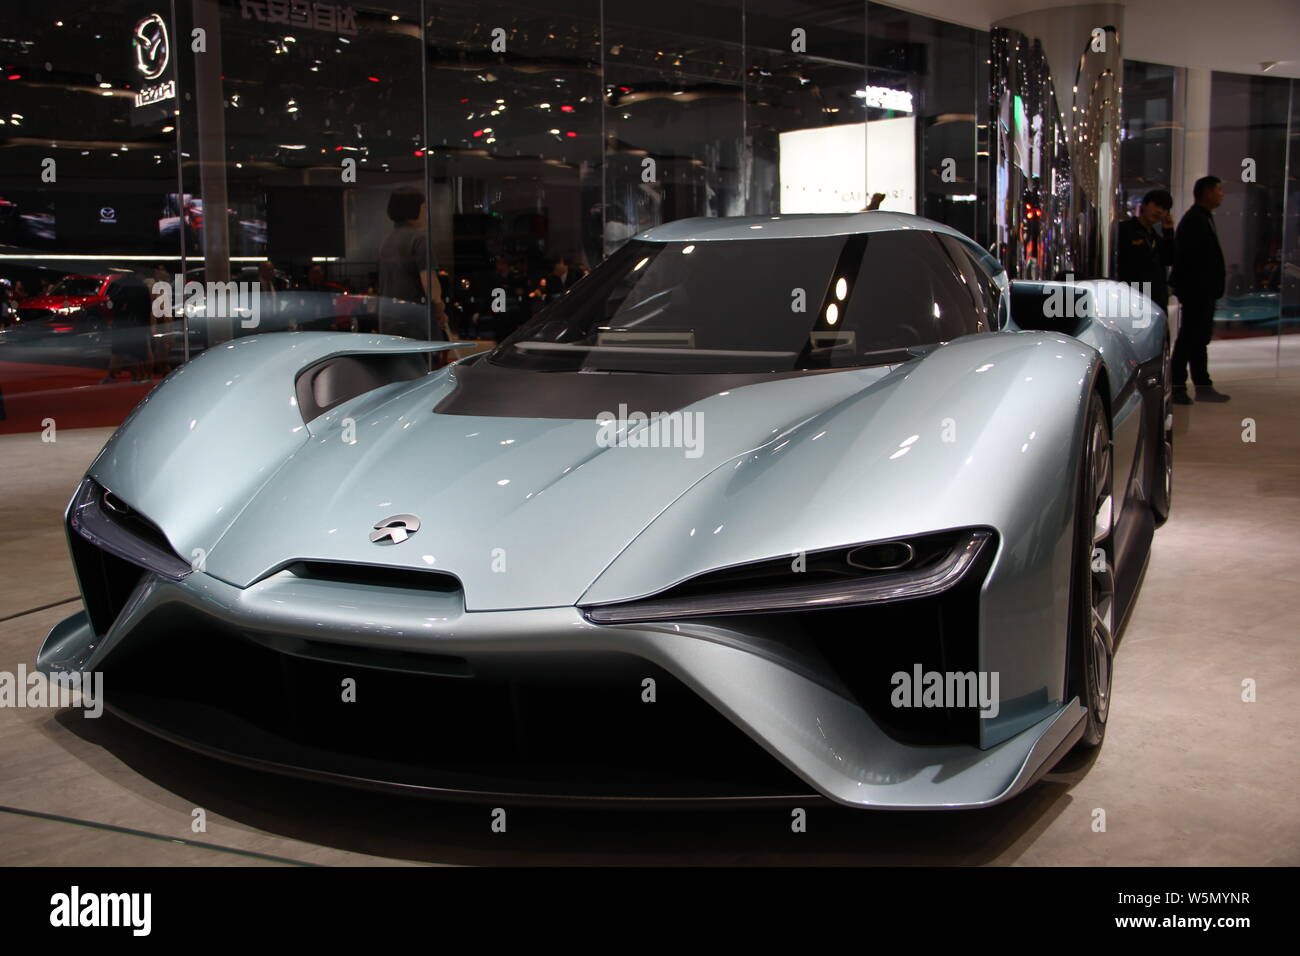 A Nio EP9 electric supercar is displayed during the 18th